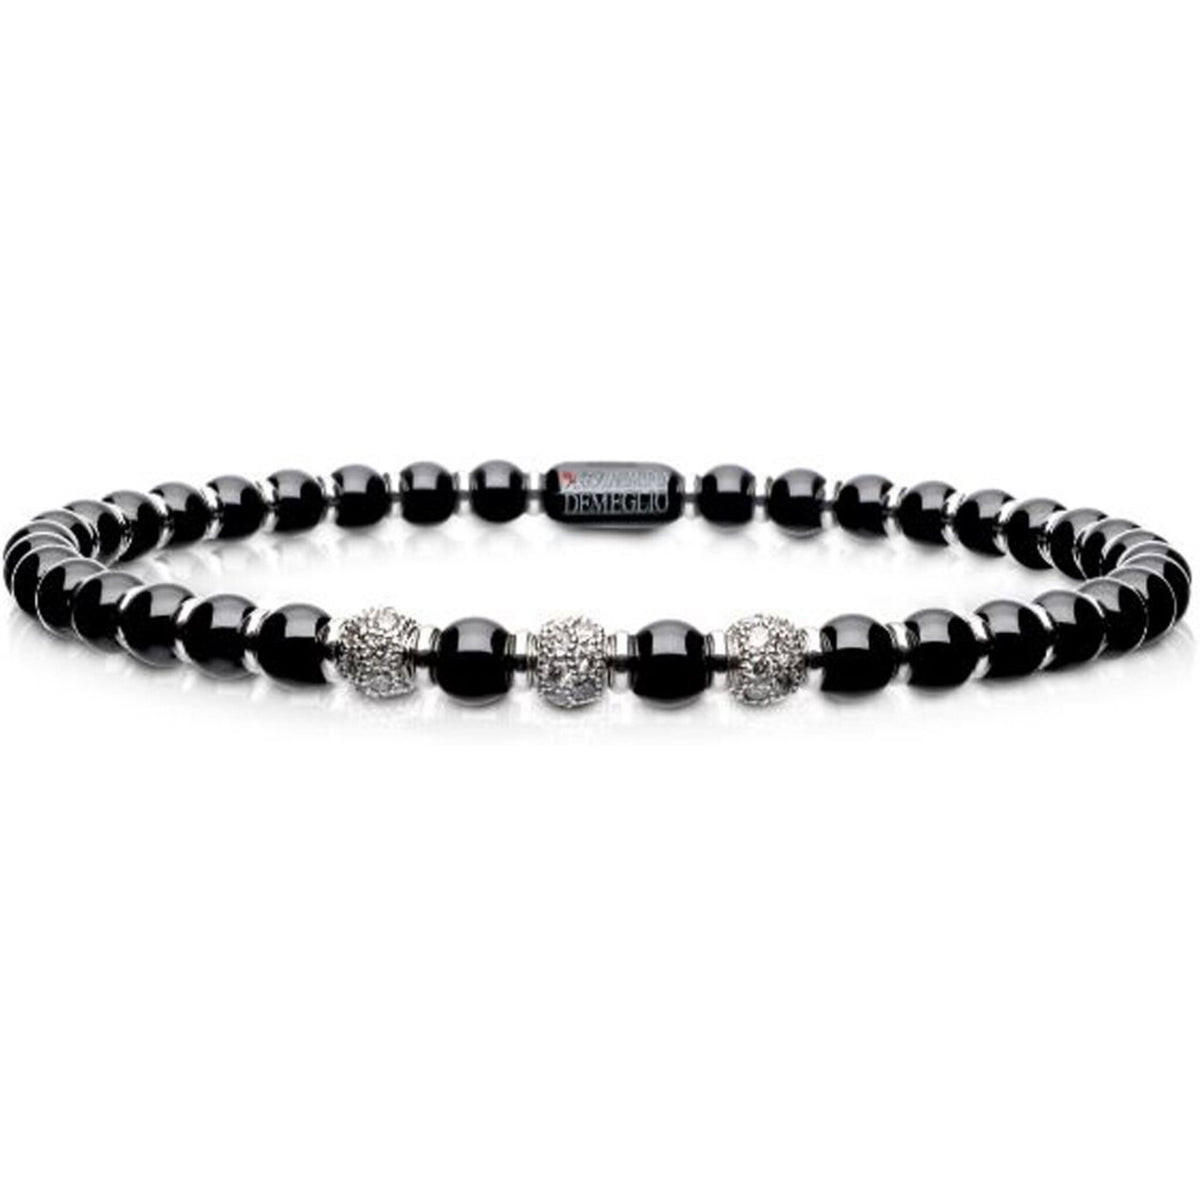 Roberto Demeglio - 4mm Black Ceramic Stretch Bracelet With 3 Diamond Beads and Gold Rodells in 18K White Gold